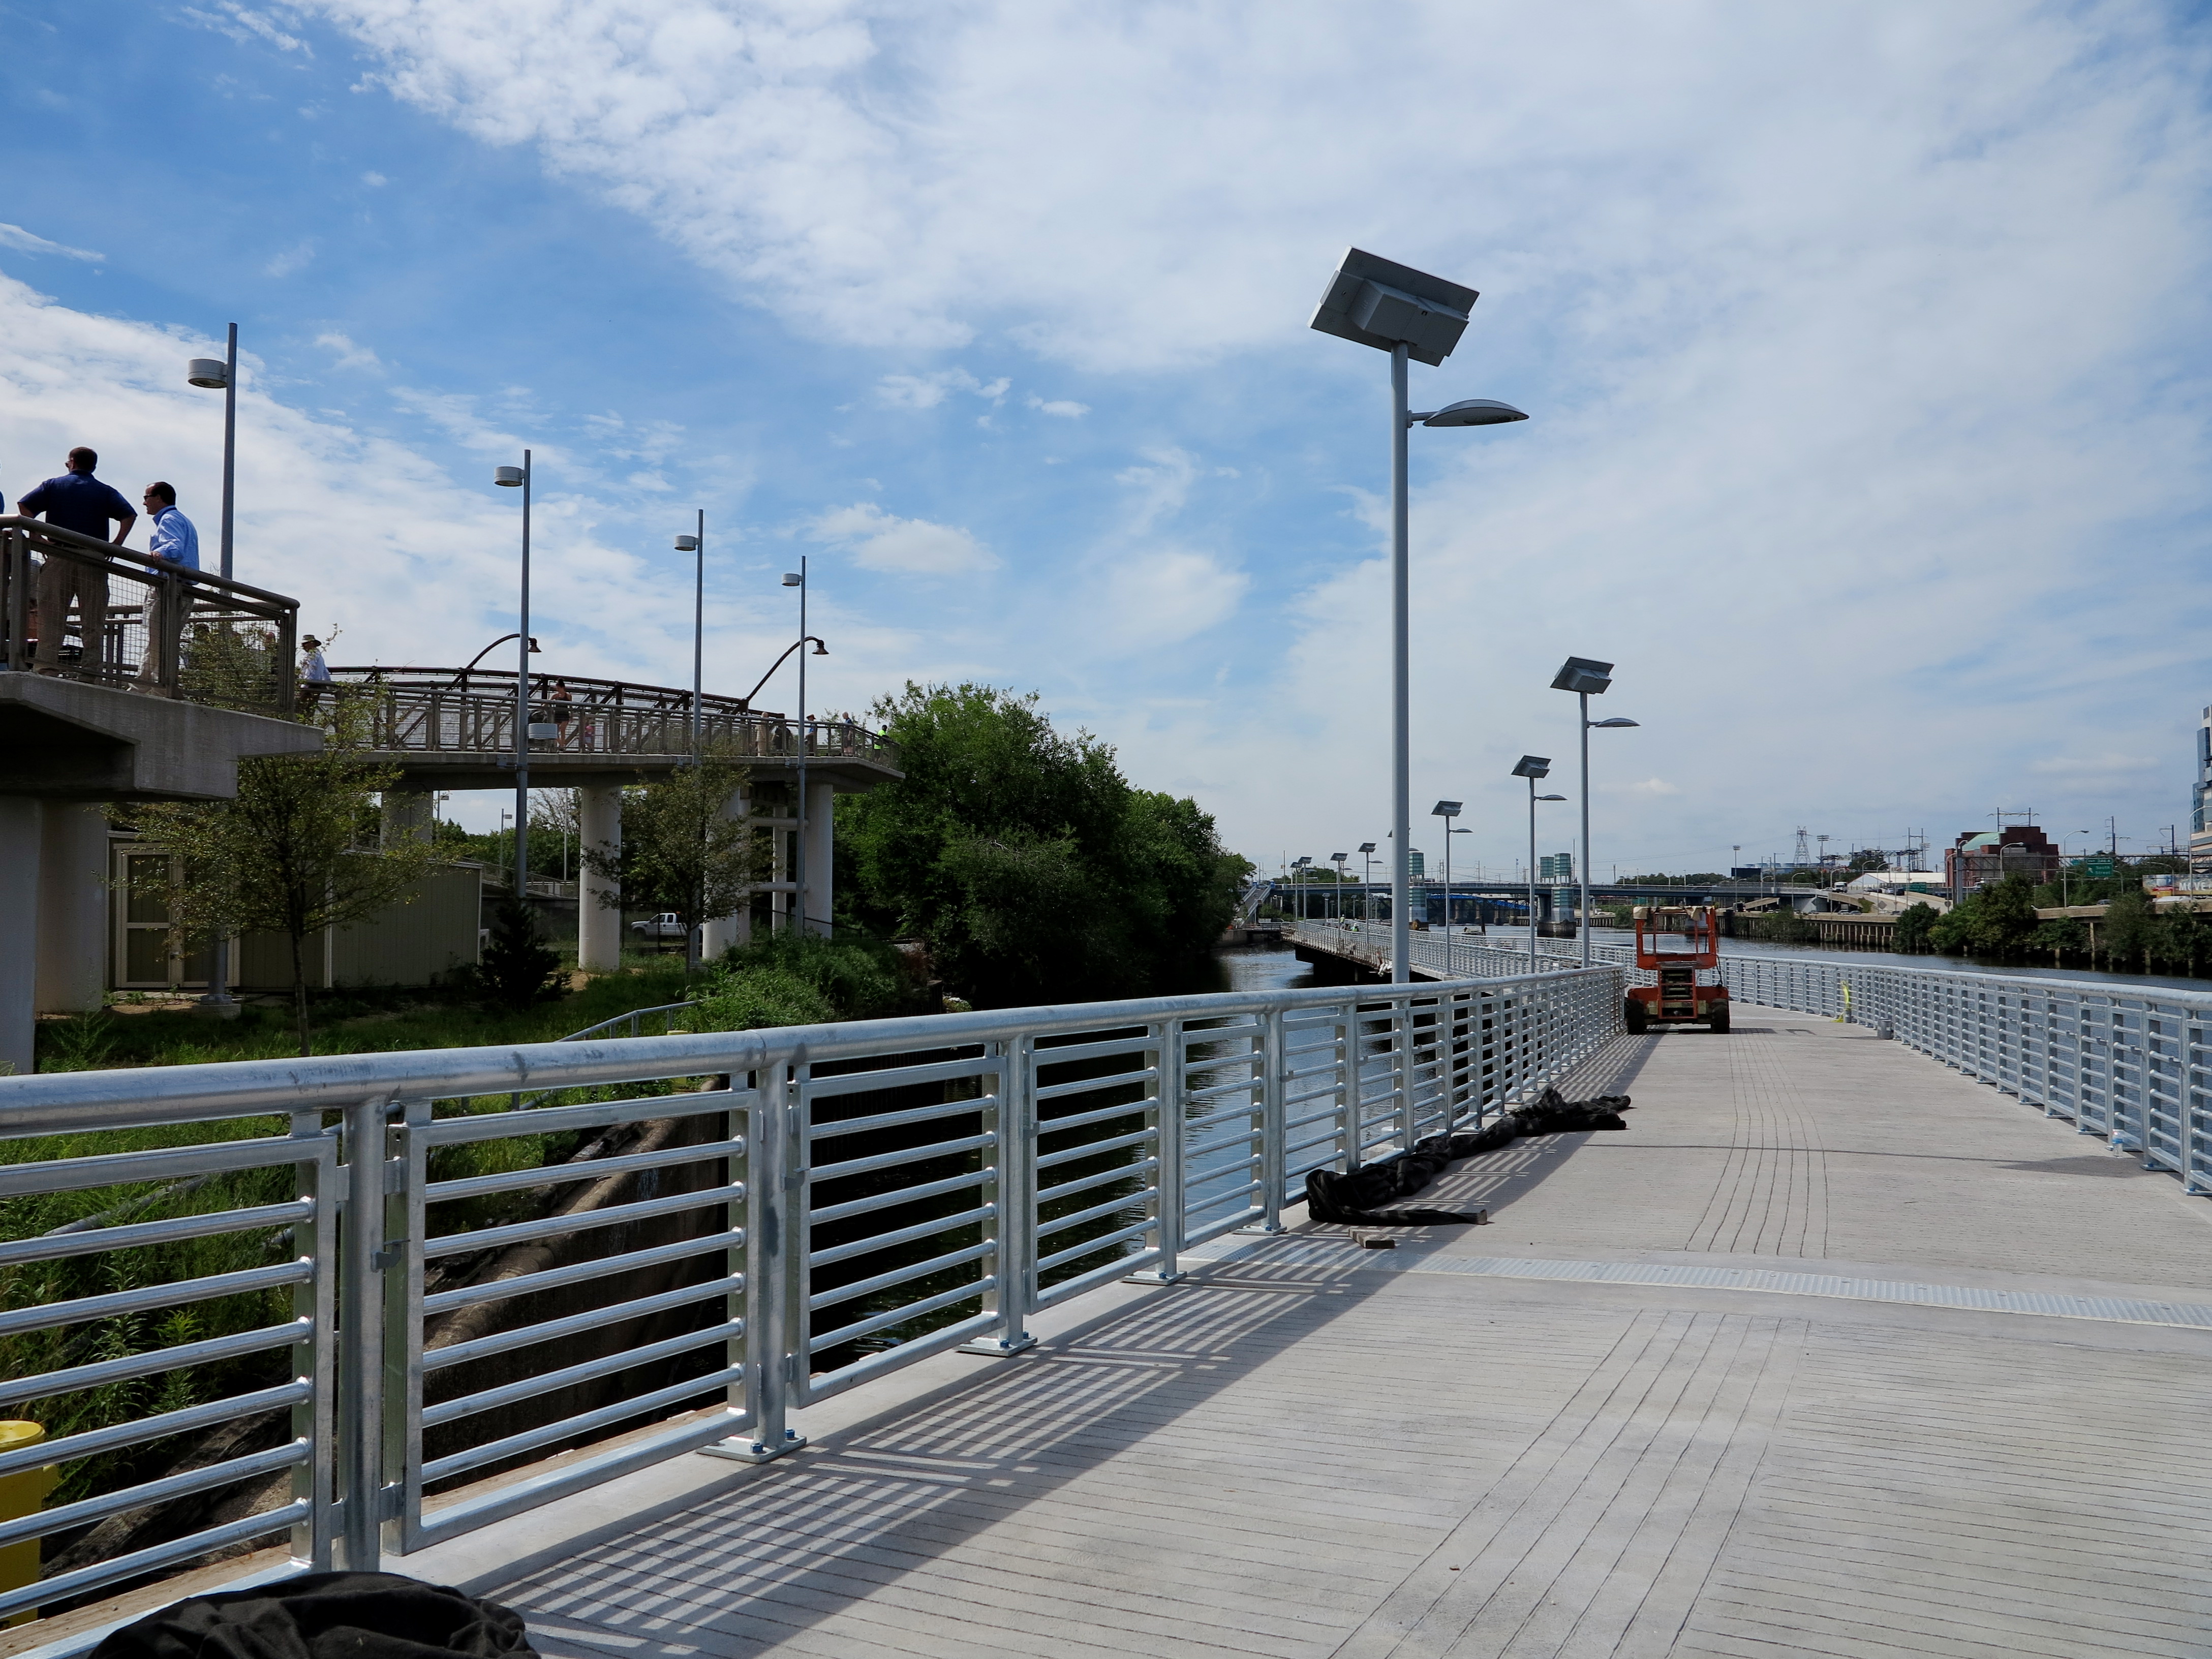 The Connector Bridge runs parallel to and overlooks the new boardwalk